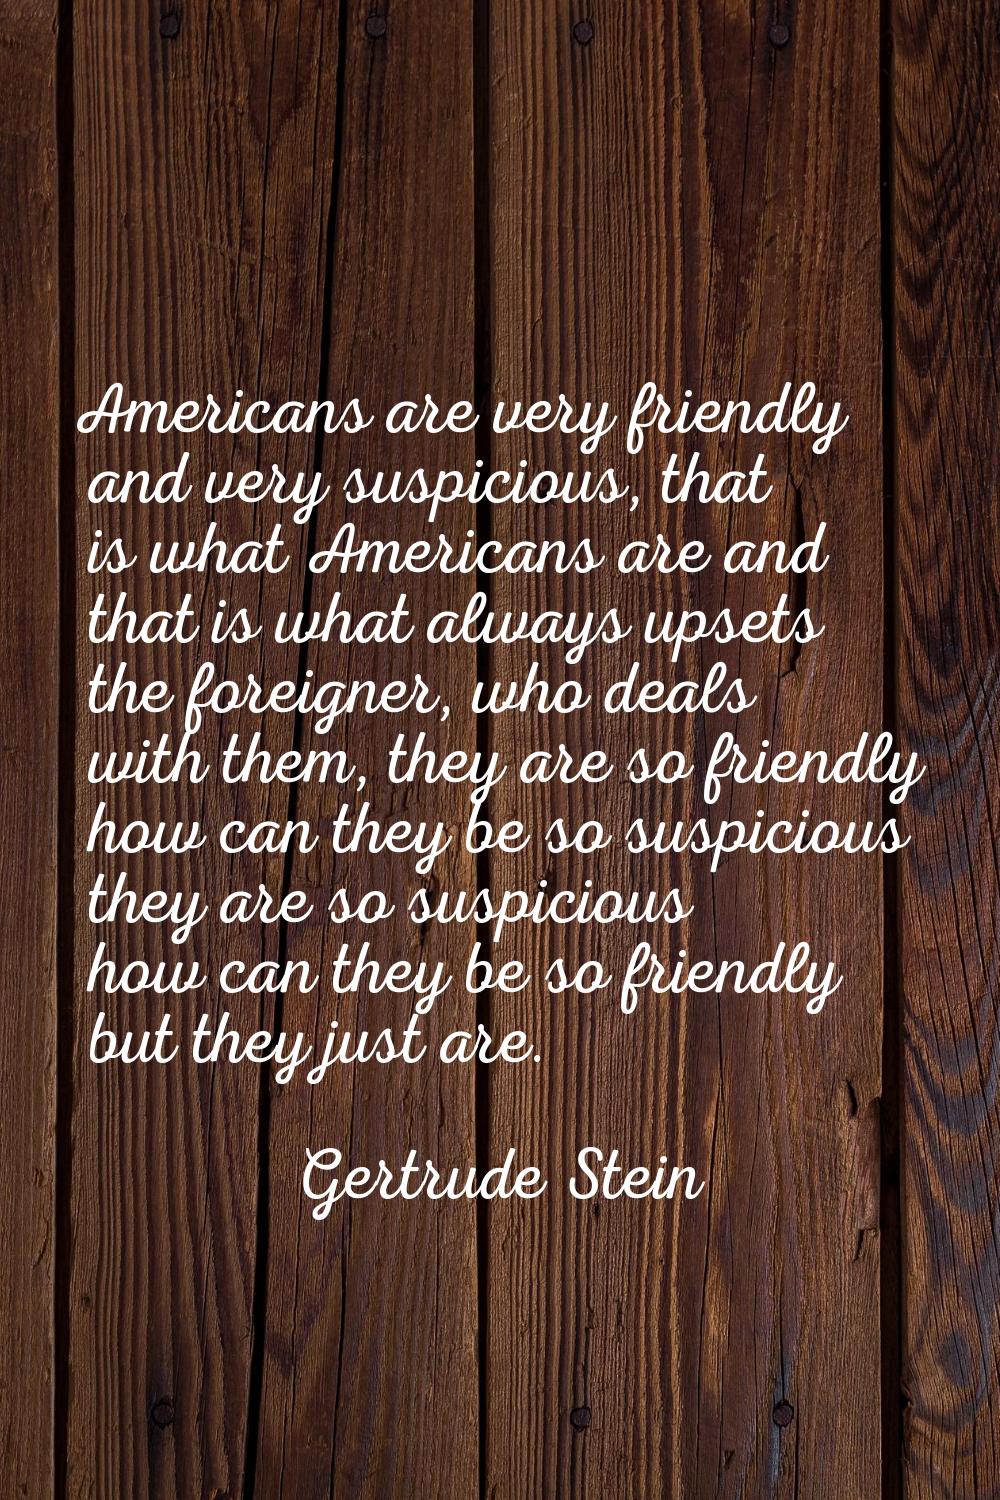 Americans are very friendly and very suspicious, that is what Americans are and that is what always